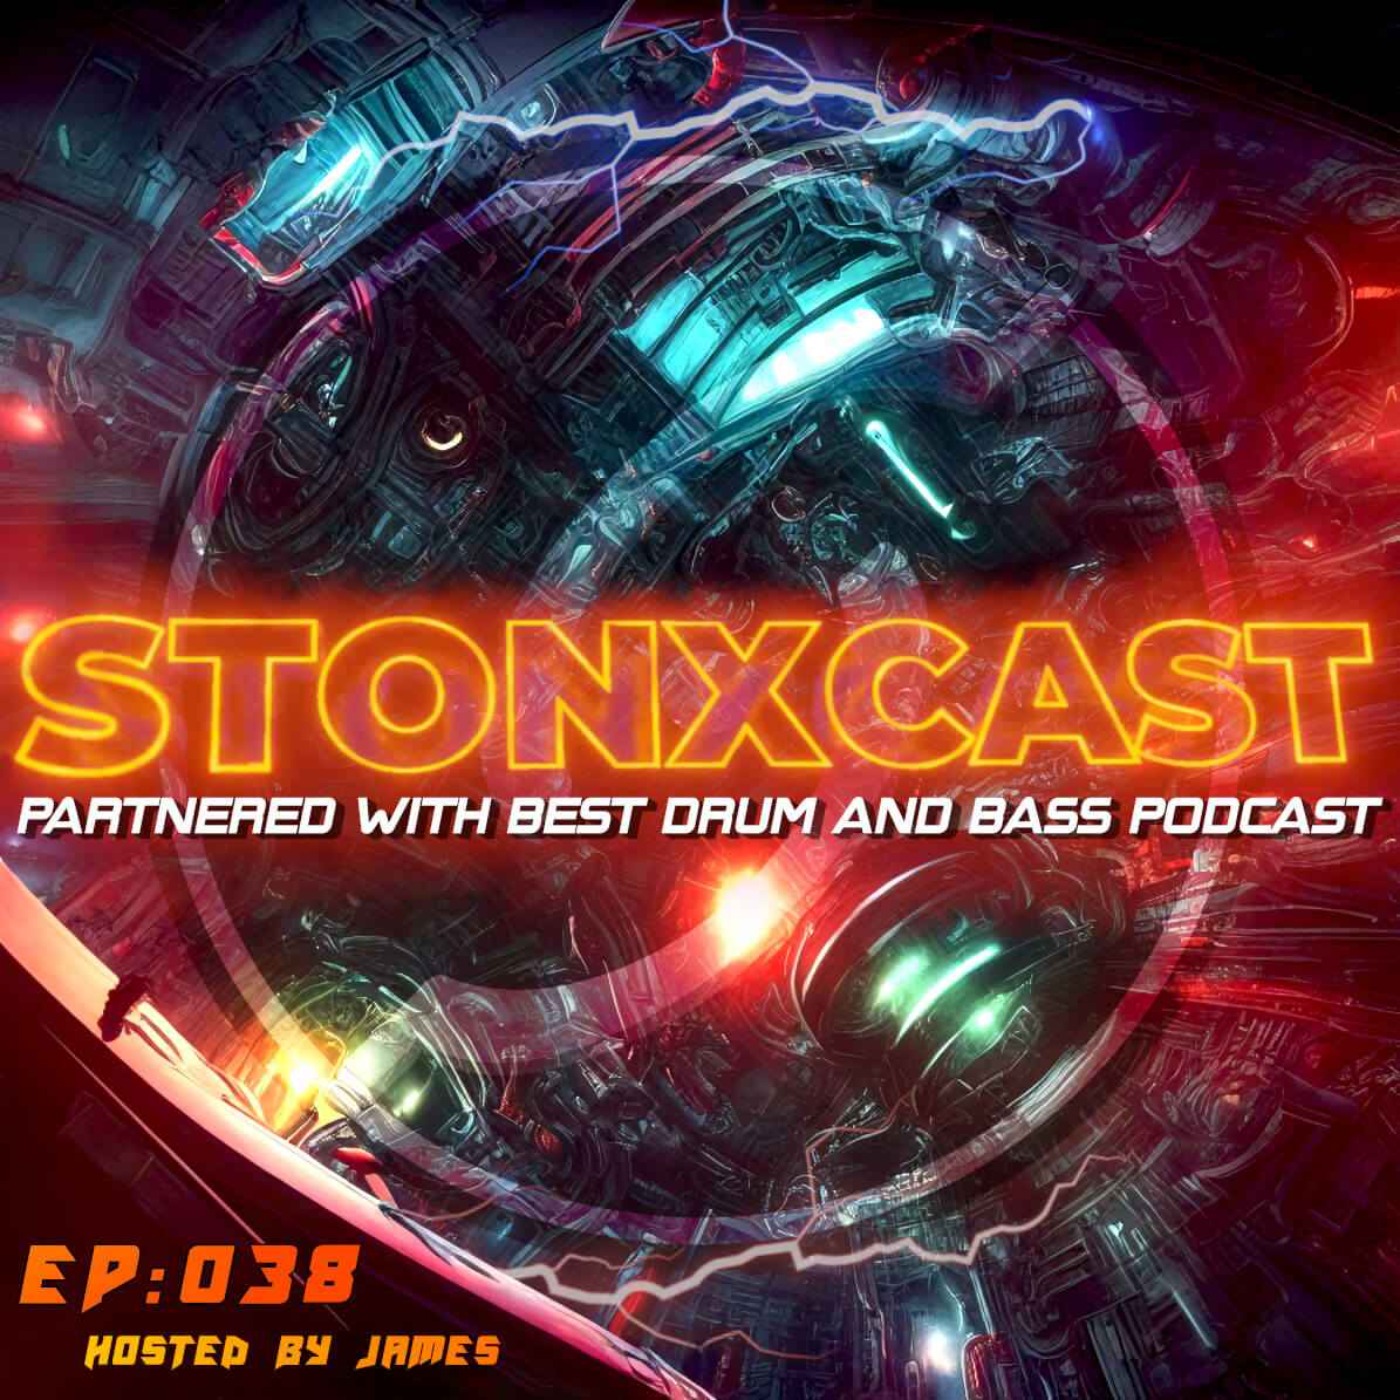  Stonxcast EP:038 - Hosted by James Artwork